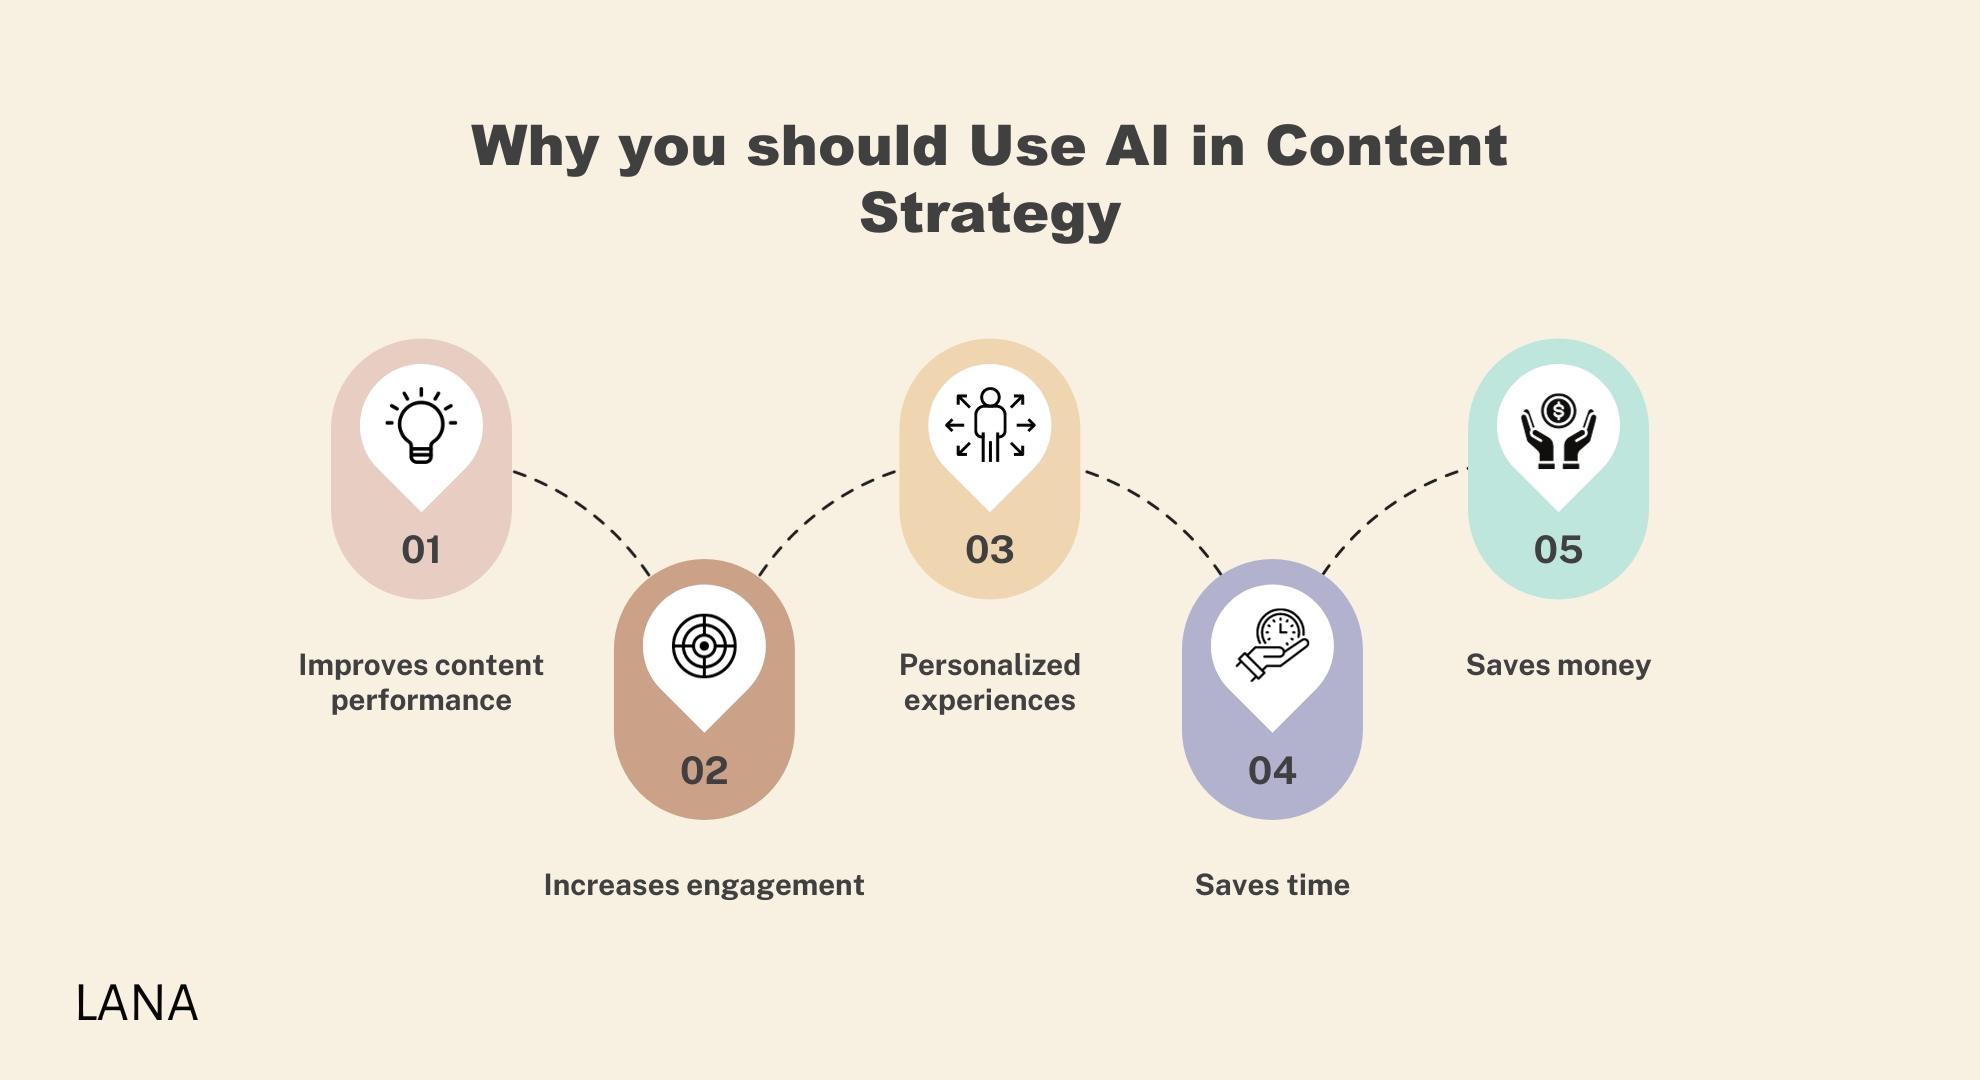 Why you should Use AI in Content Strategy